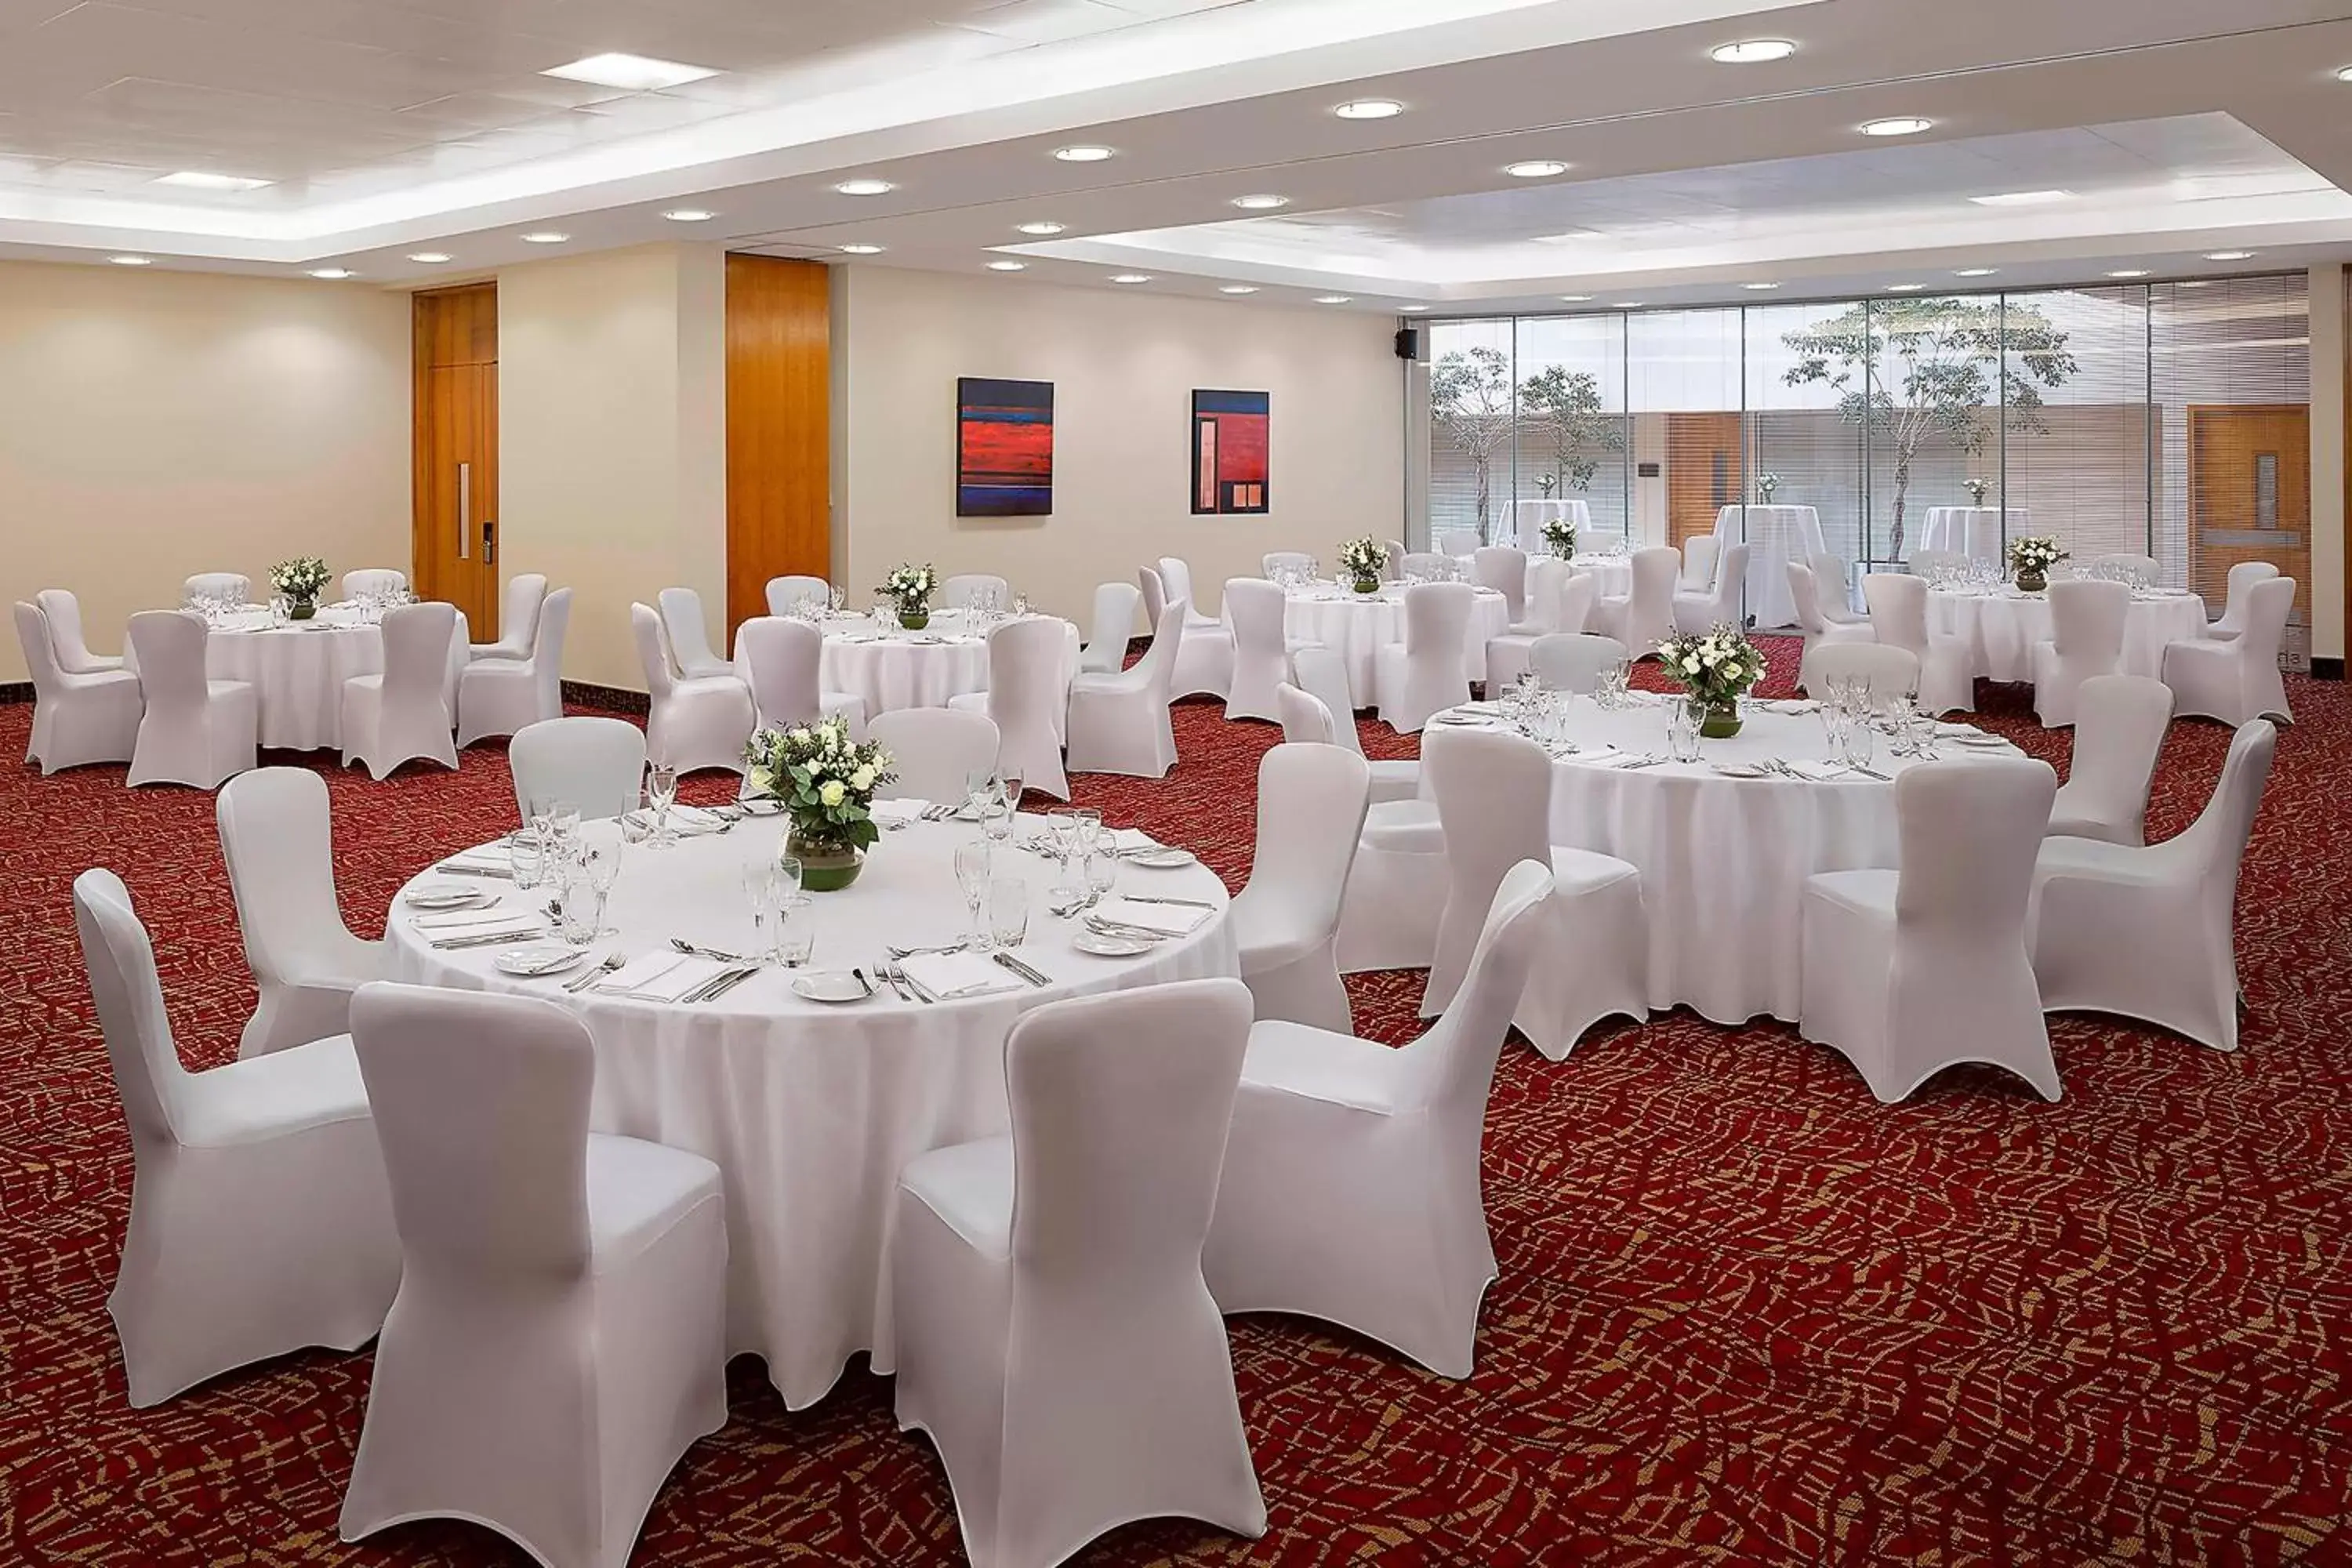 Meeting/conference room, Banquet Facilities in Sheraton Heathrow Hotel